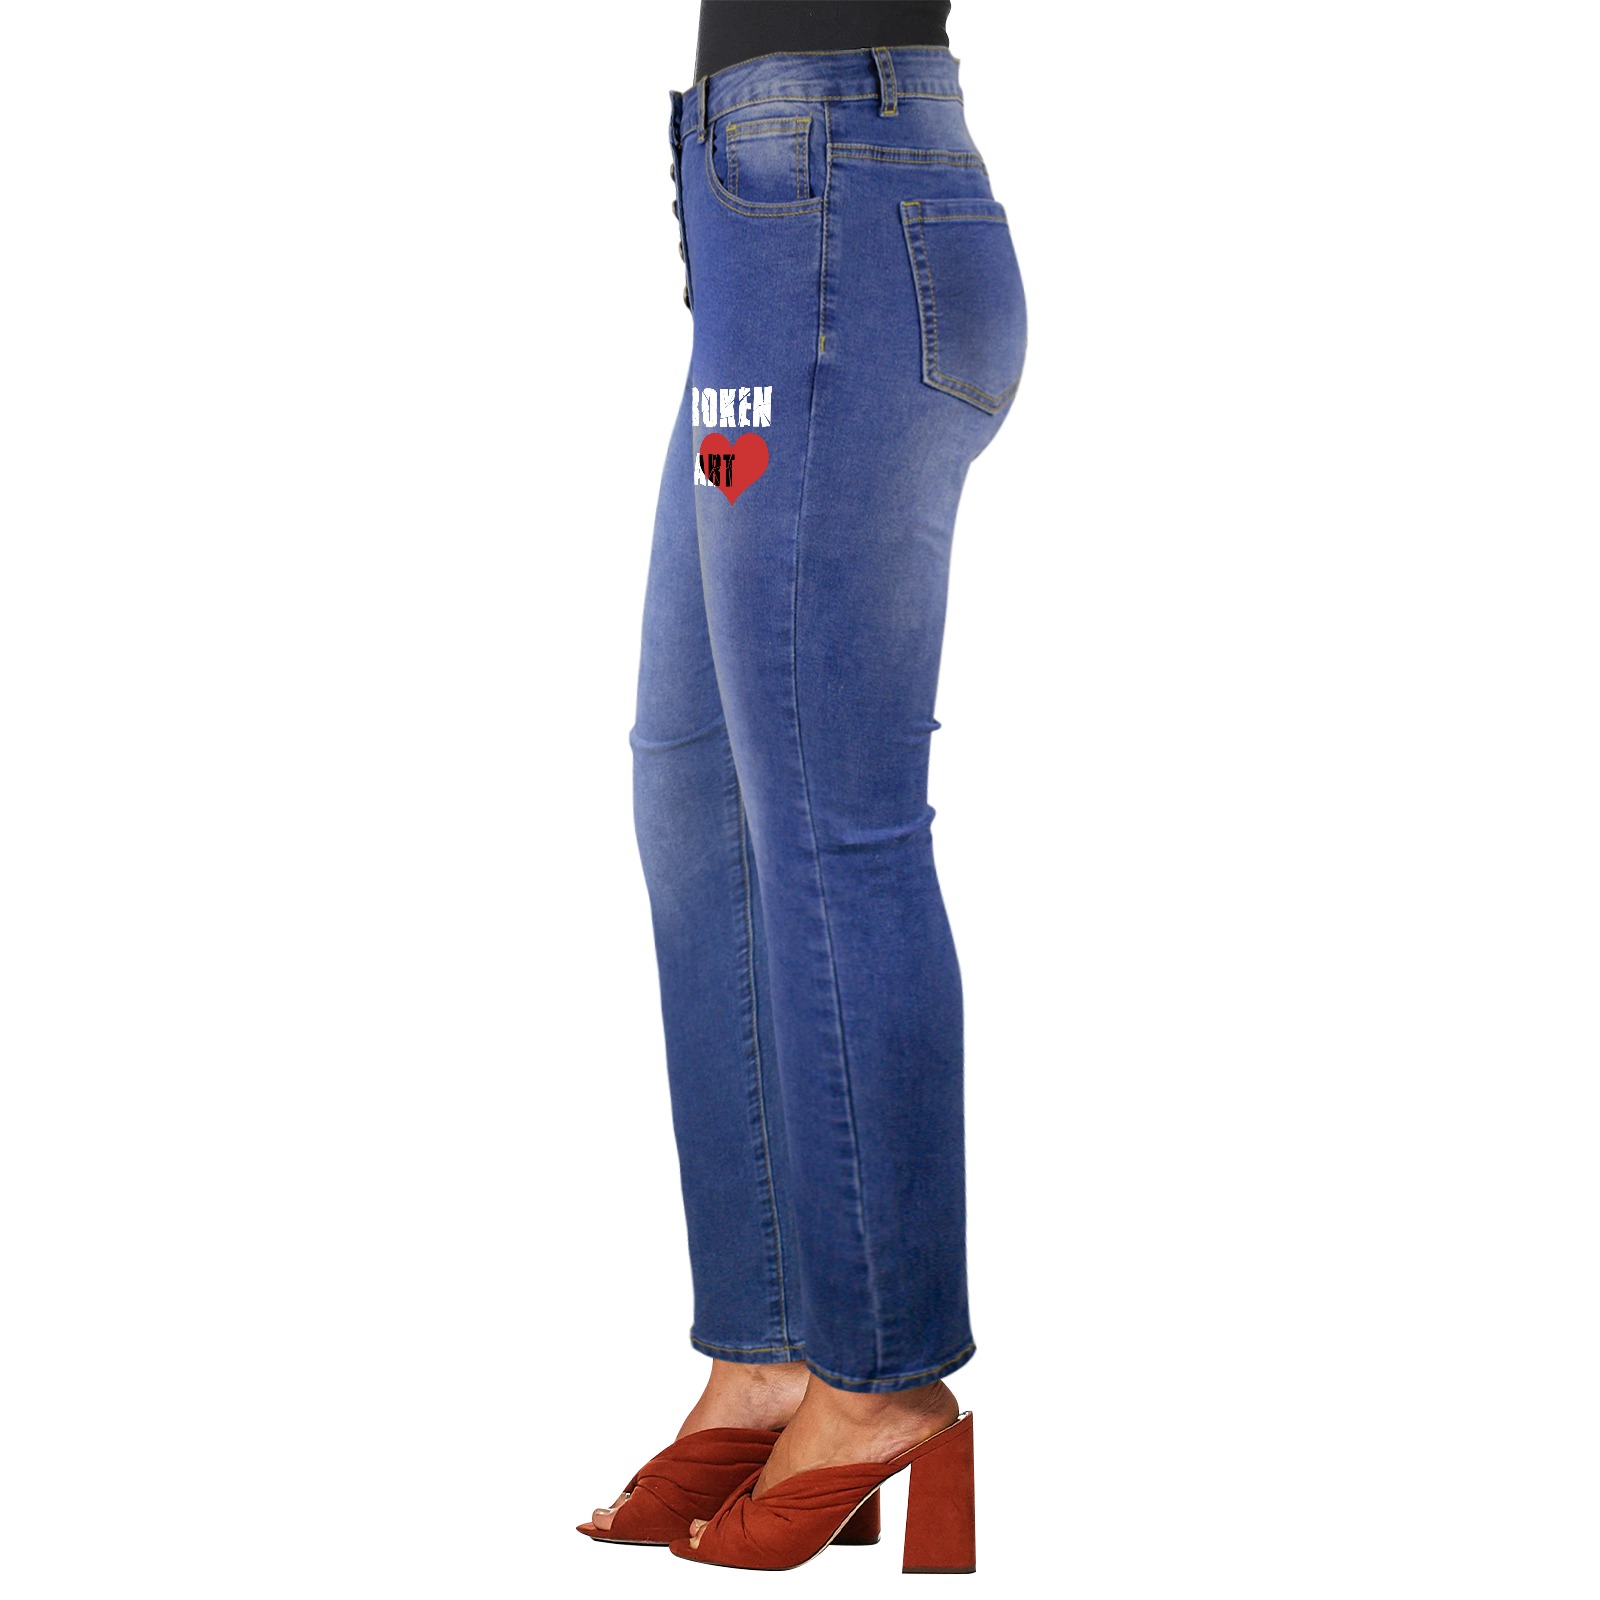 Broken heart decorative text and red heart image. Women's Jeans (Front Printing)